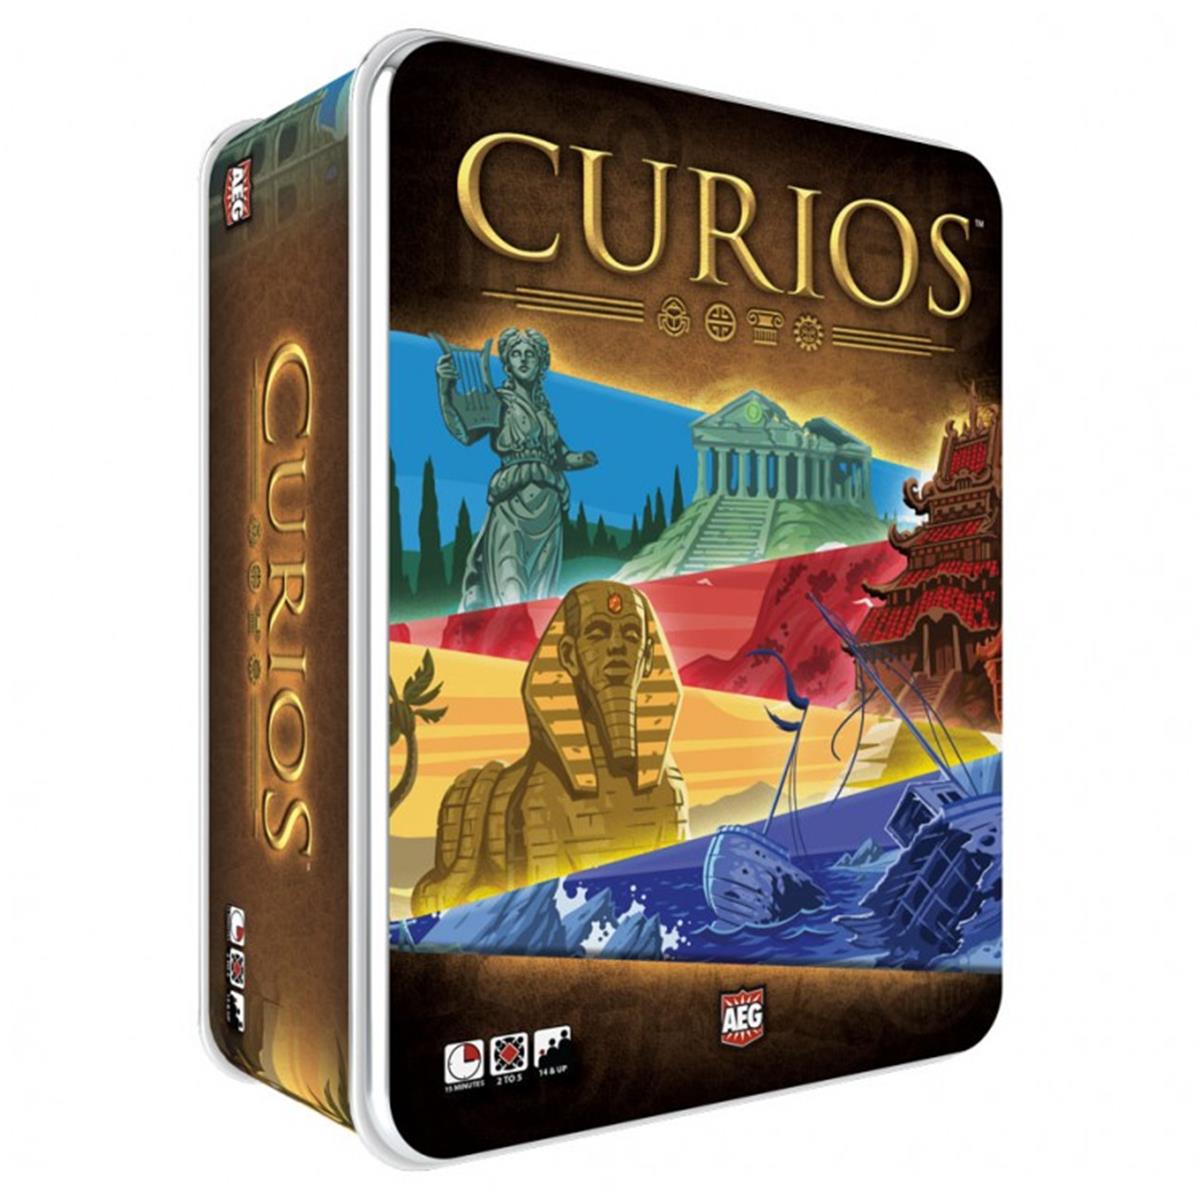 Aeg7058 Curios Game With 2-5 Players